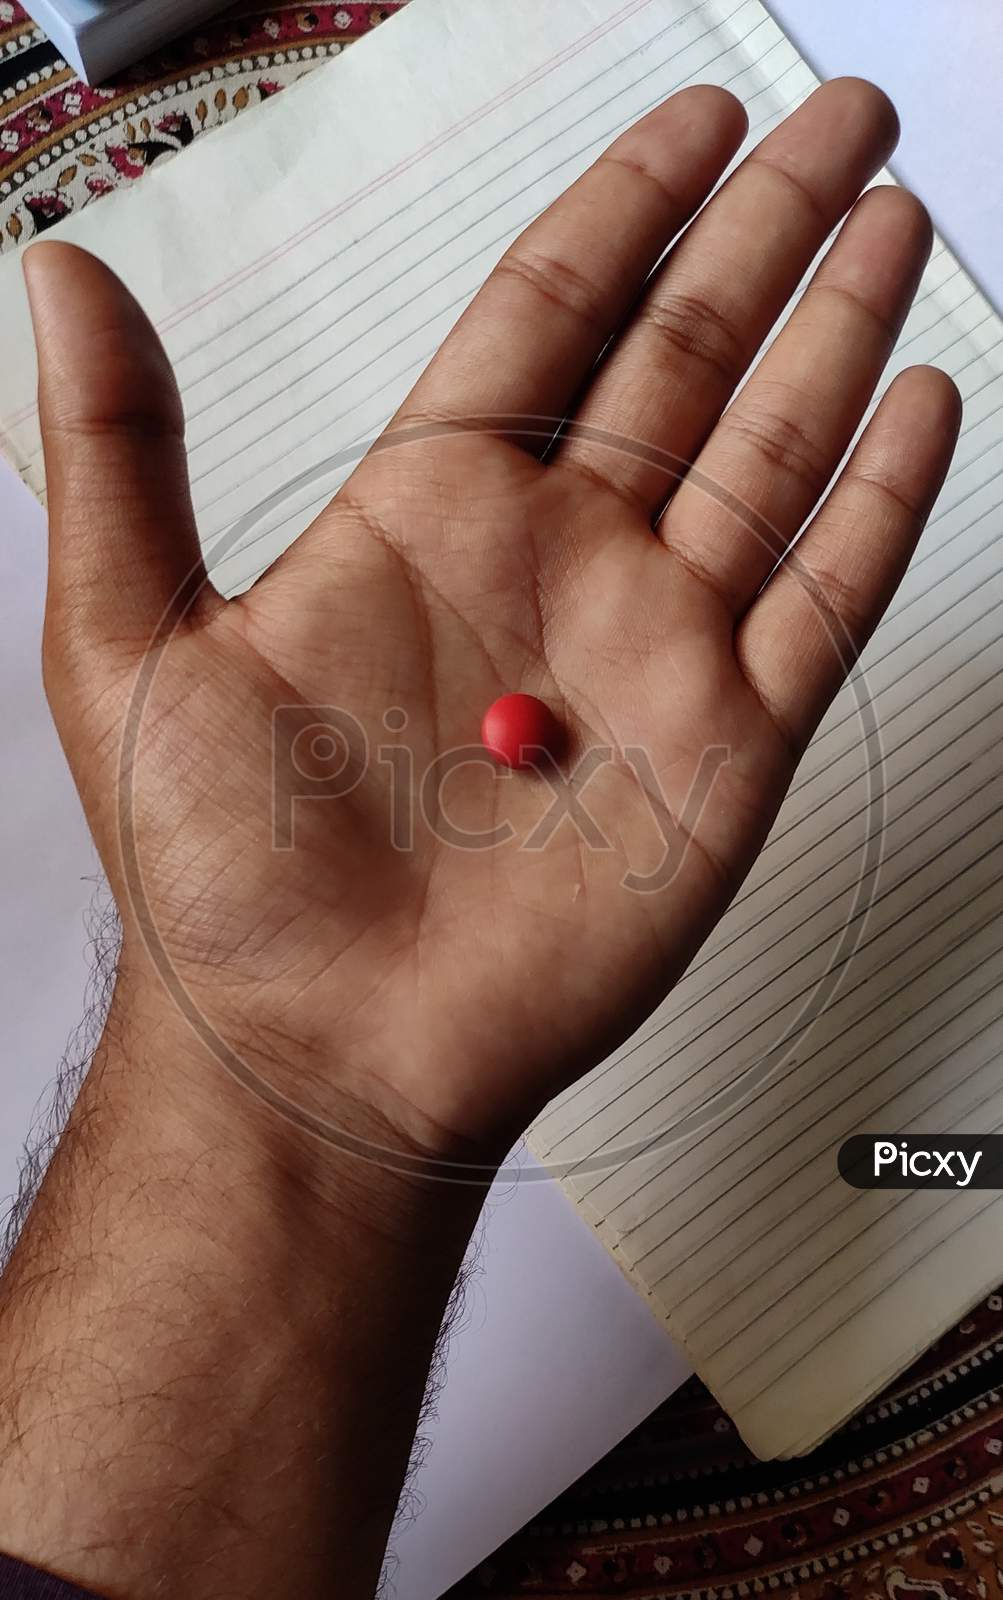 Red Pill in a Hand photo